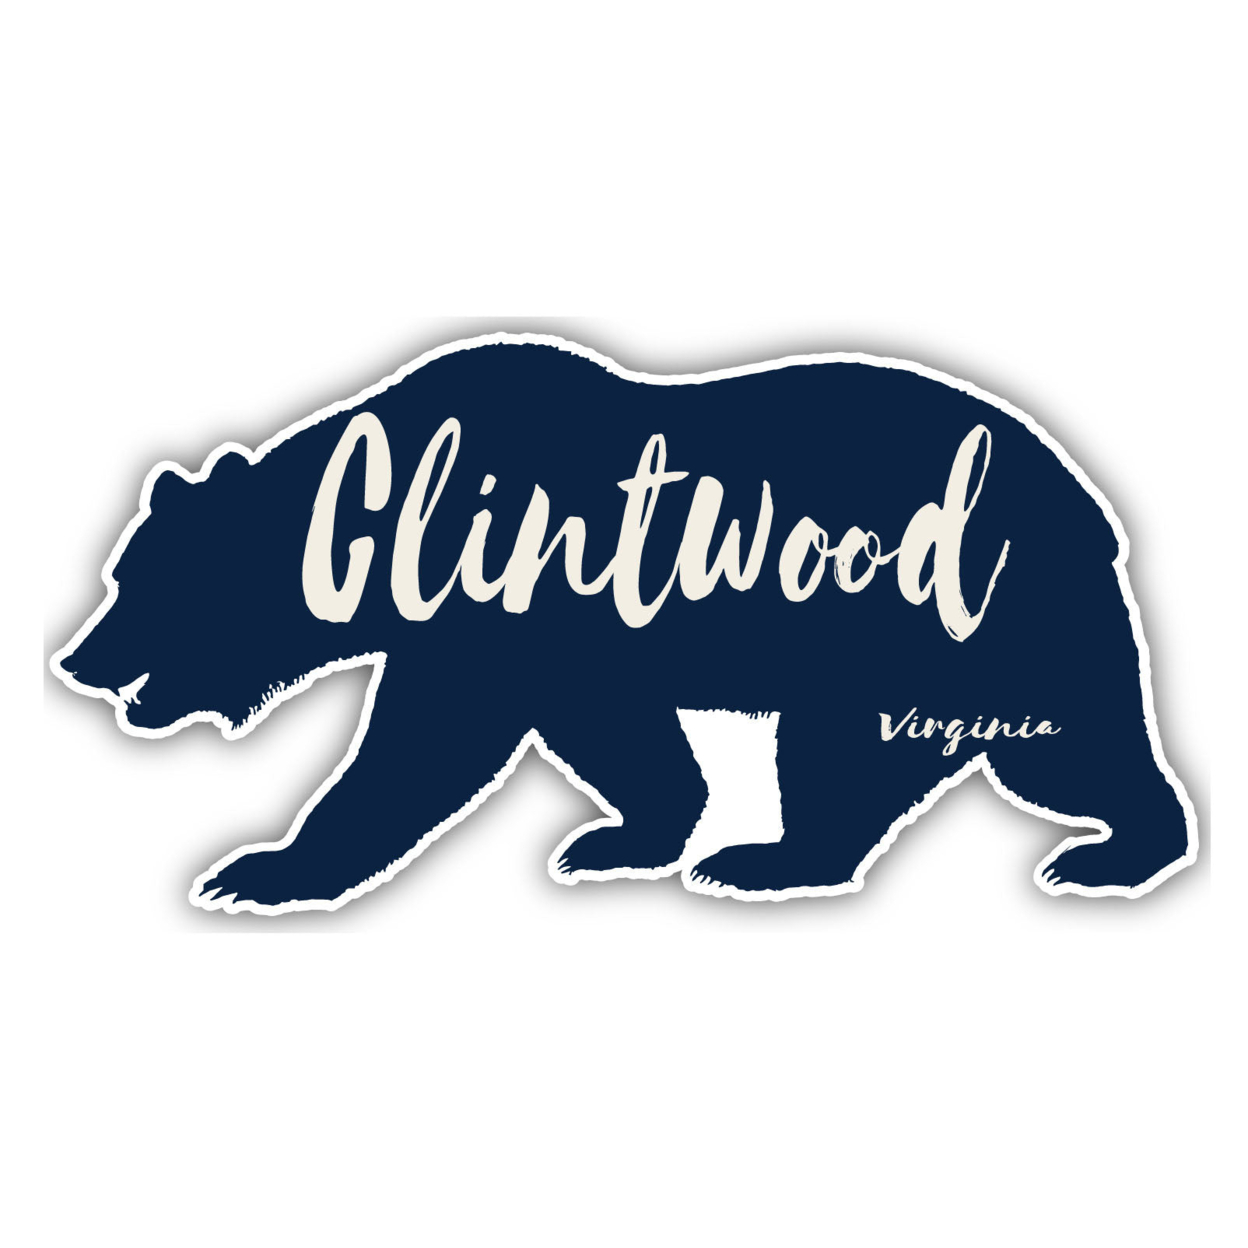 Clintwood Virginia Souvenir Decorative Stickers (Choose Theme And Size) - 4-Pack, 10-Inch, Bear